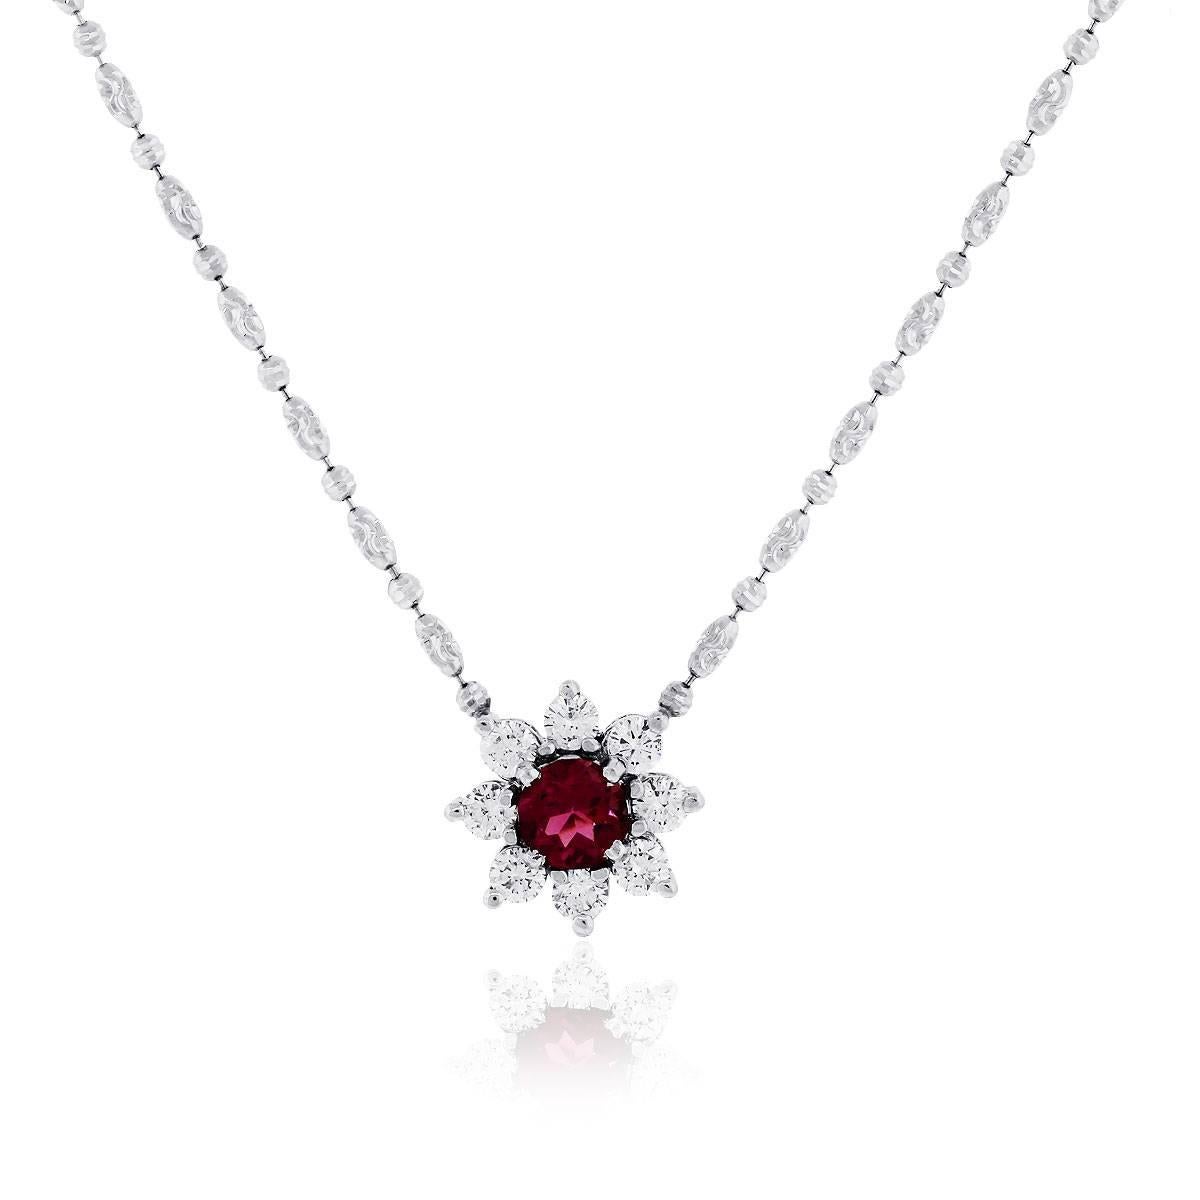 Material: 14k white gold
Diamond Details: Approximately 0.96ct round diamonds and Diamond is G/H in color and VS in clarity
Gemstone Details: Approximately 0.86ct of Tourmaline.
Pendant Measurements: 0.27″ x 0.59″ x 0.59″
Necklace Measurements: 16″